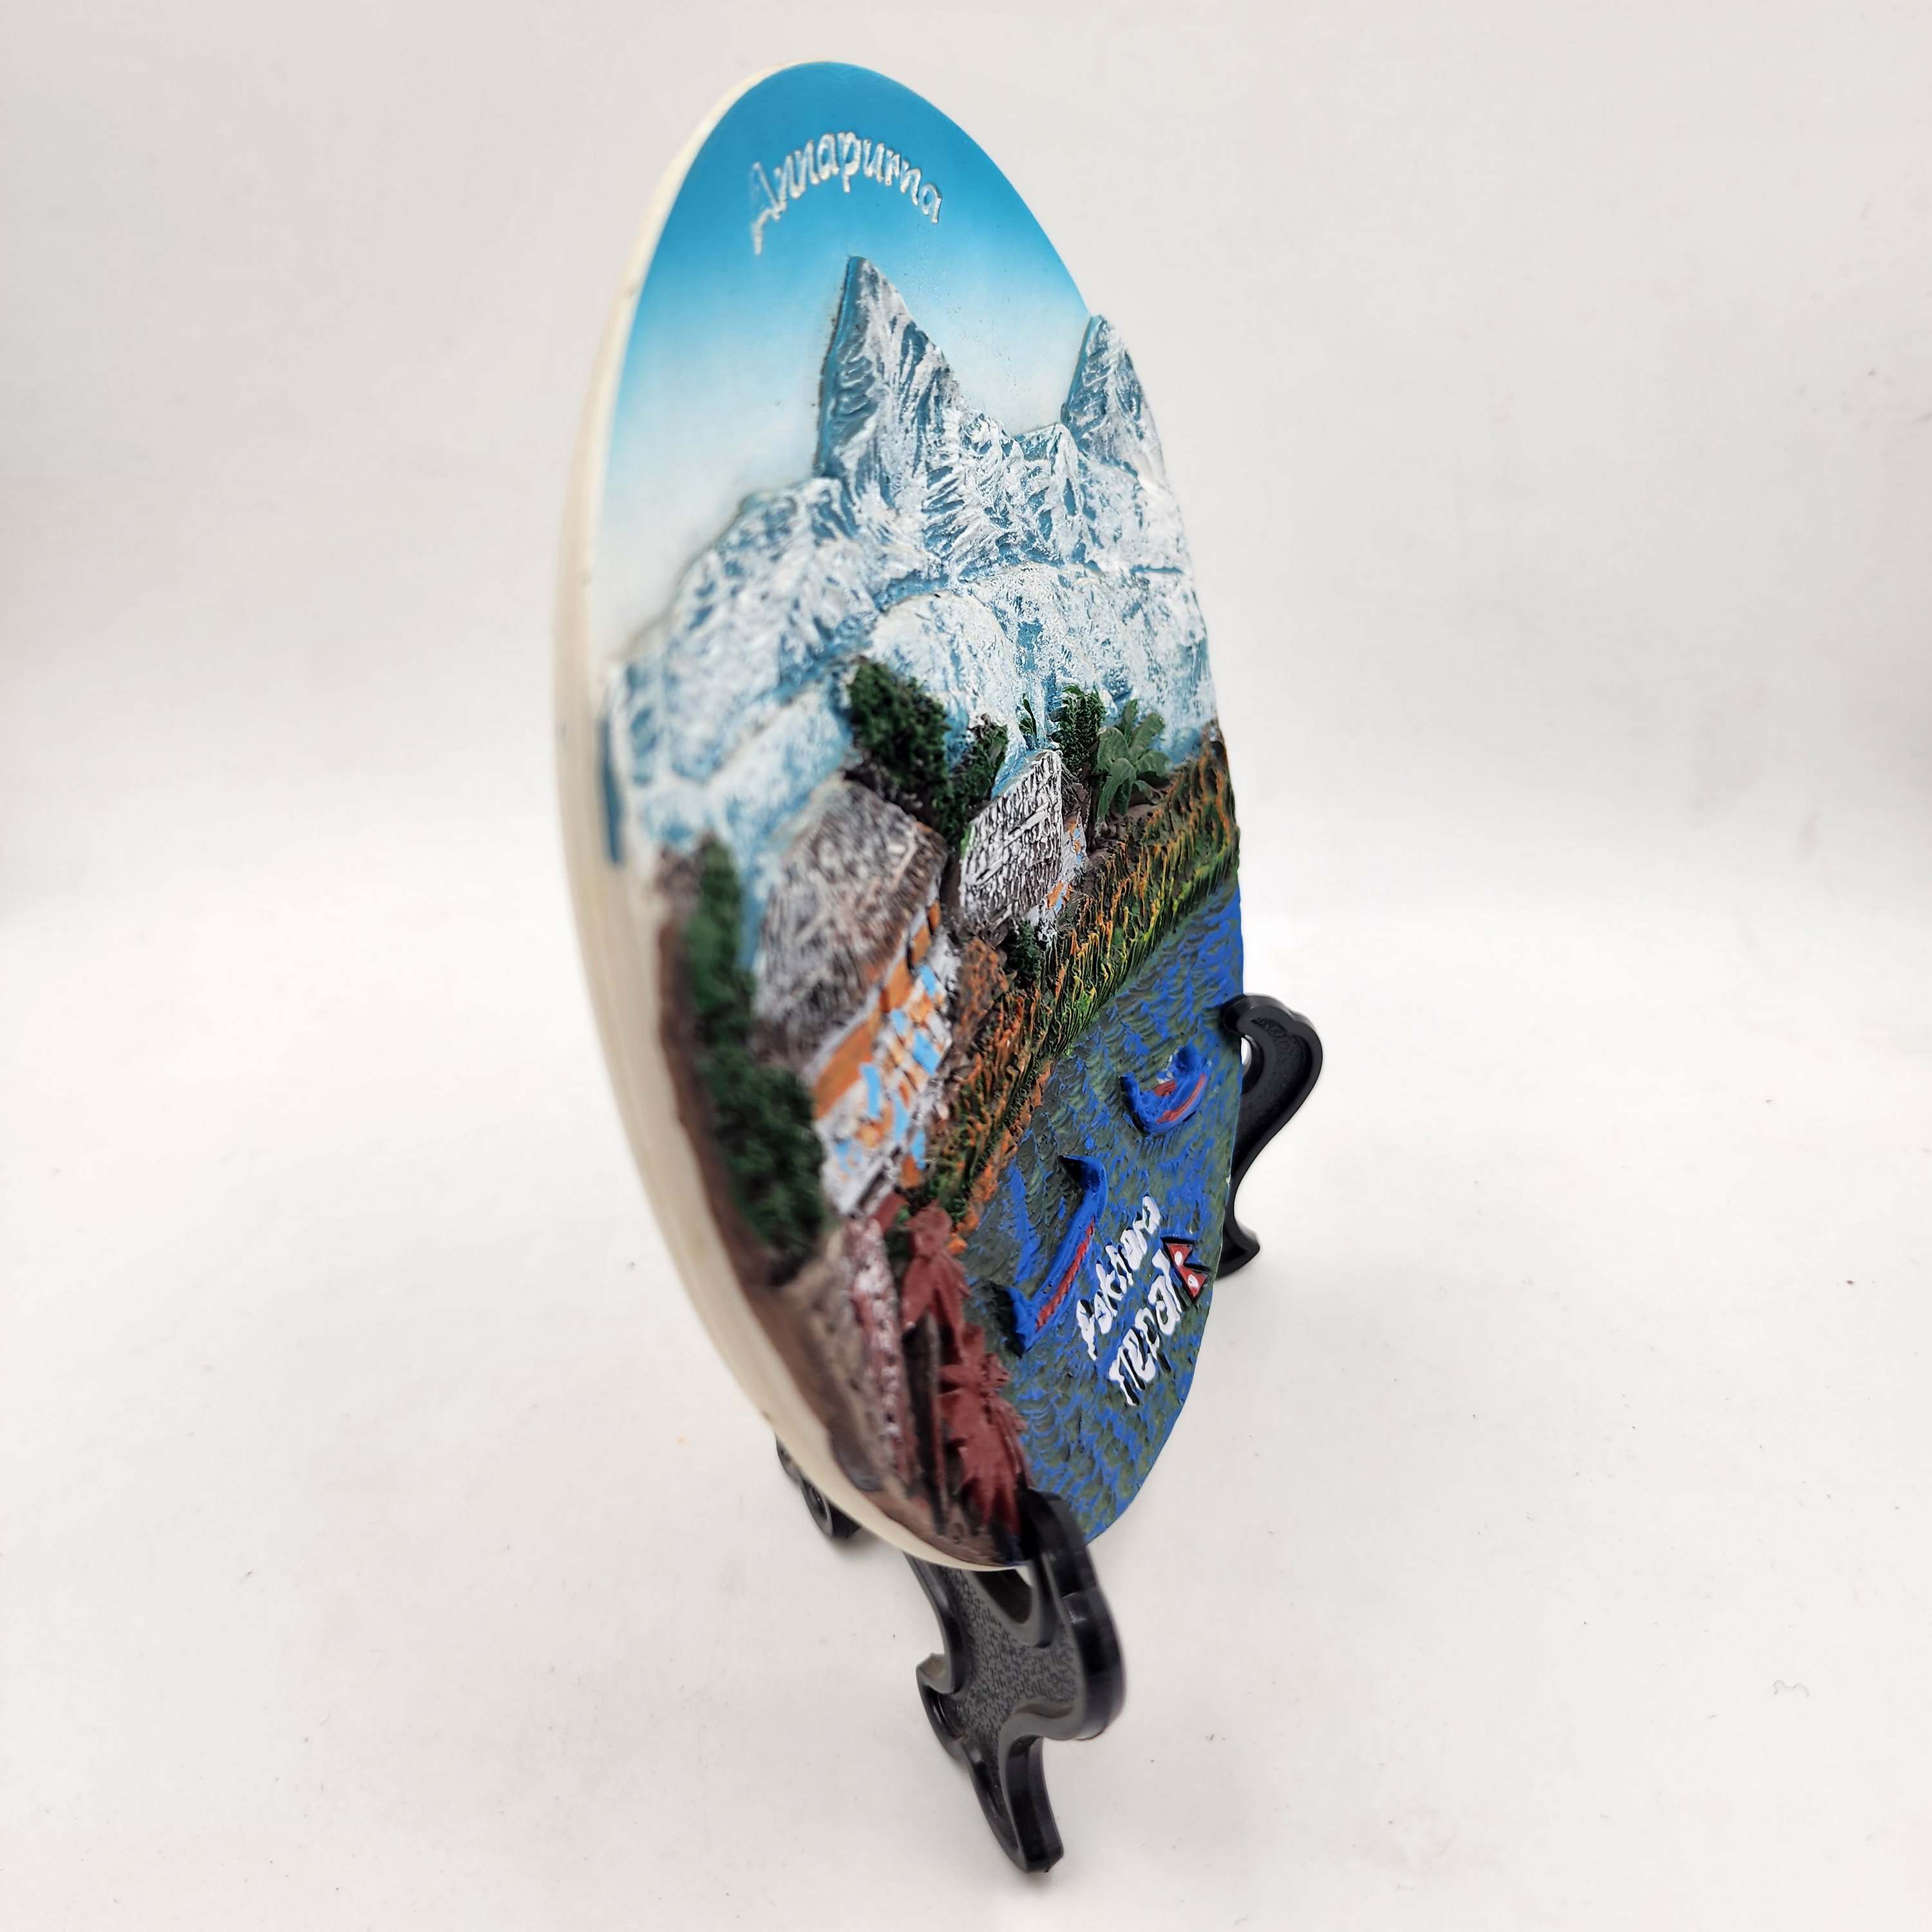 3d Fiber Art Of Pokhara City Of Nepal With Stand And Wall Hanger, Ceramic Plate, Souvenir